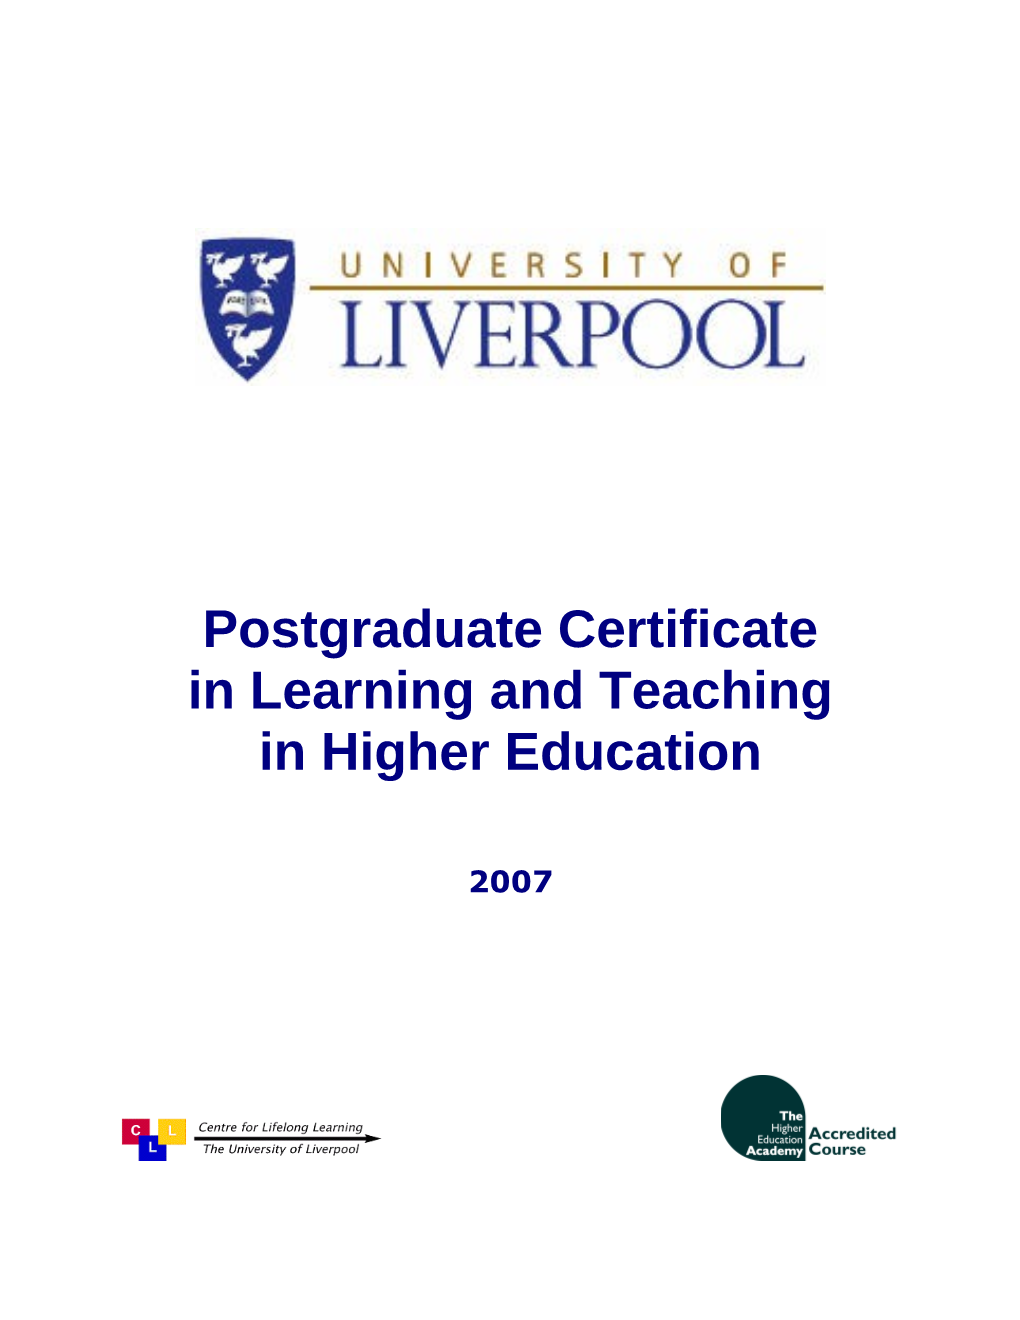 Postgraduate Certificate in Teaching and Learning in Higher Education